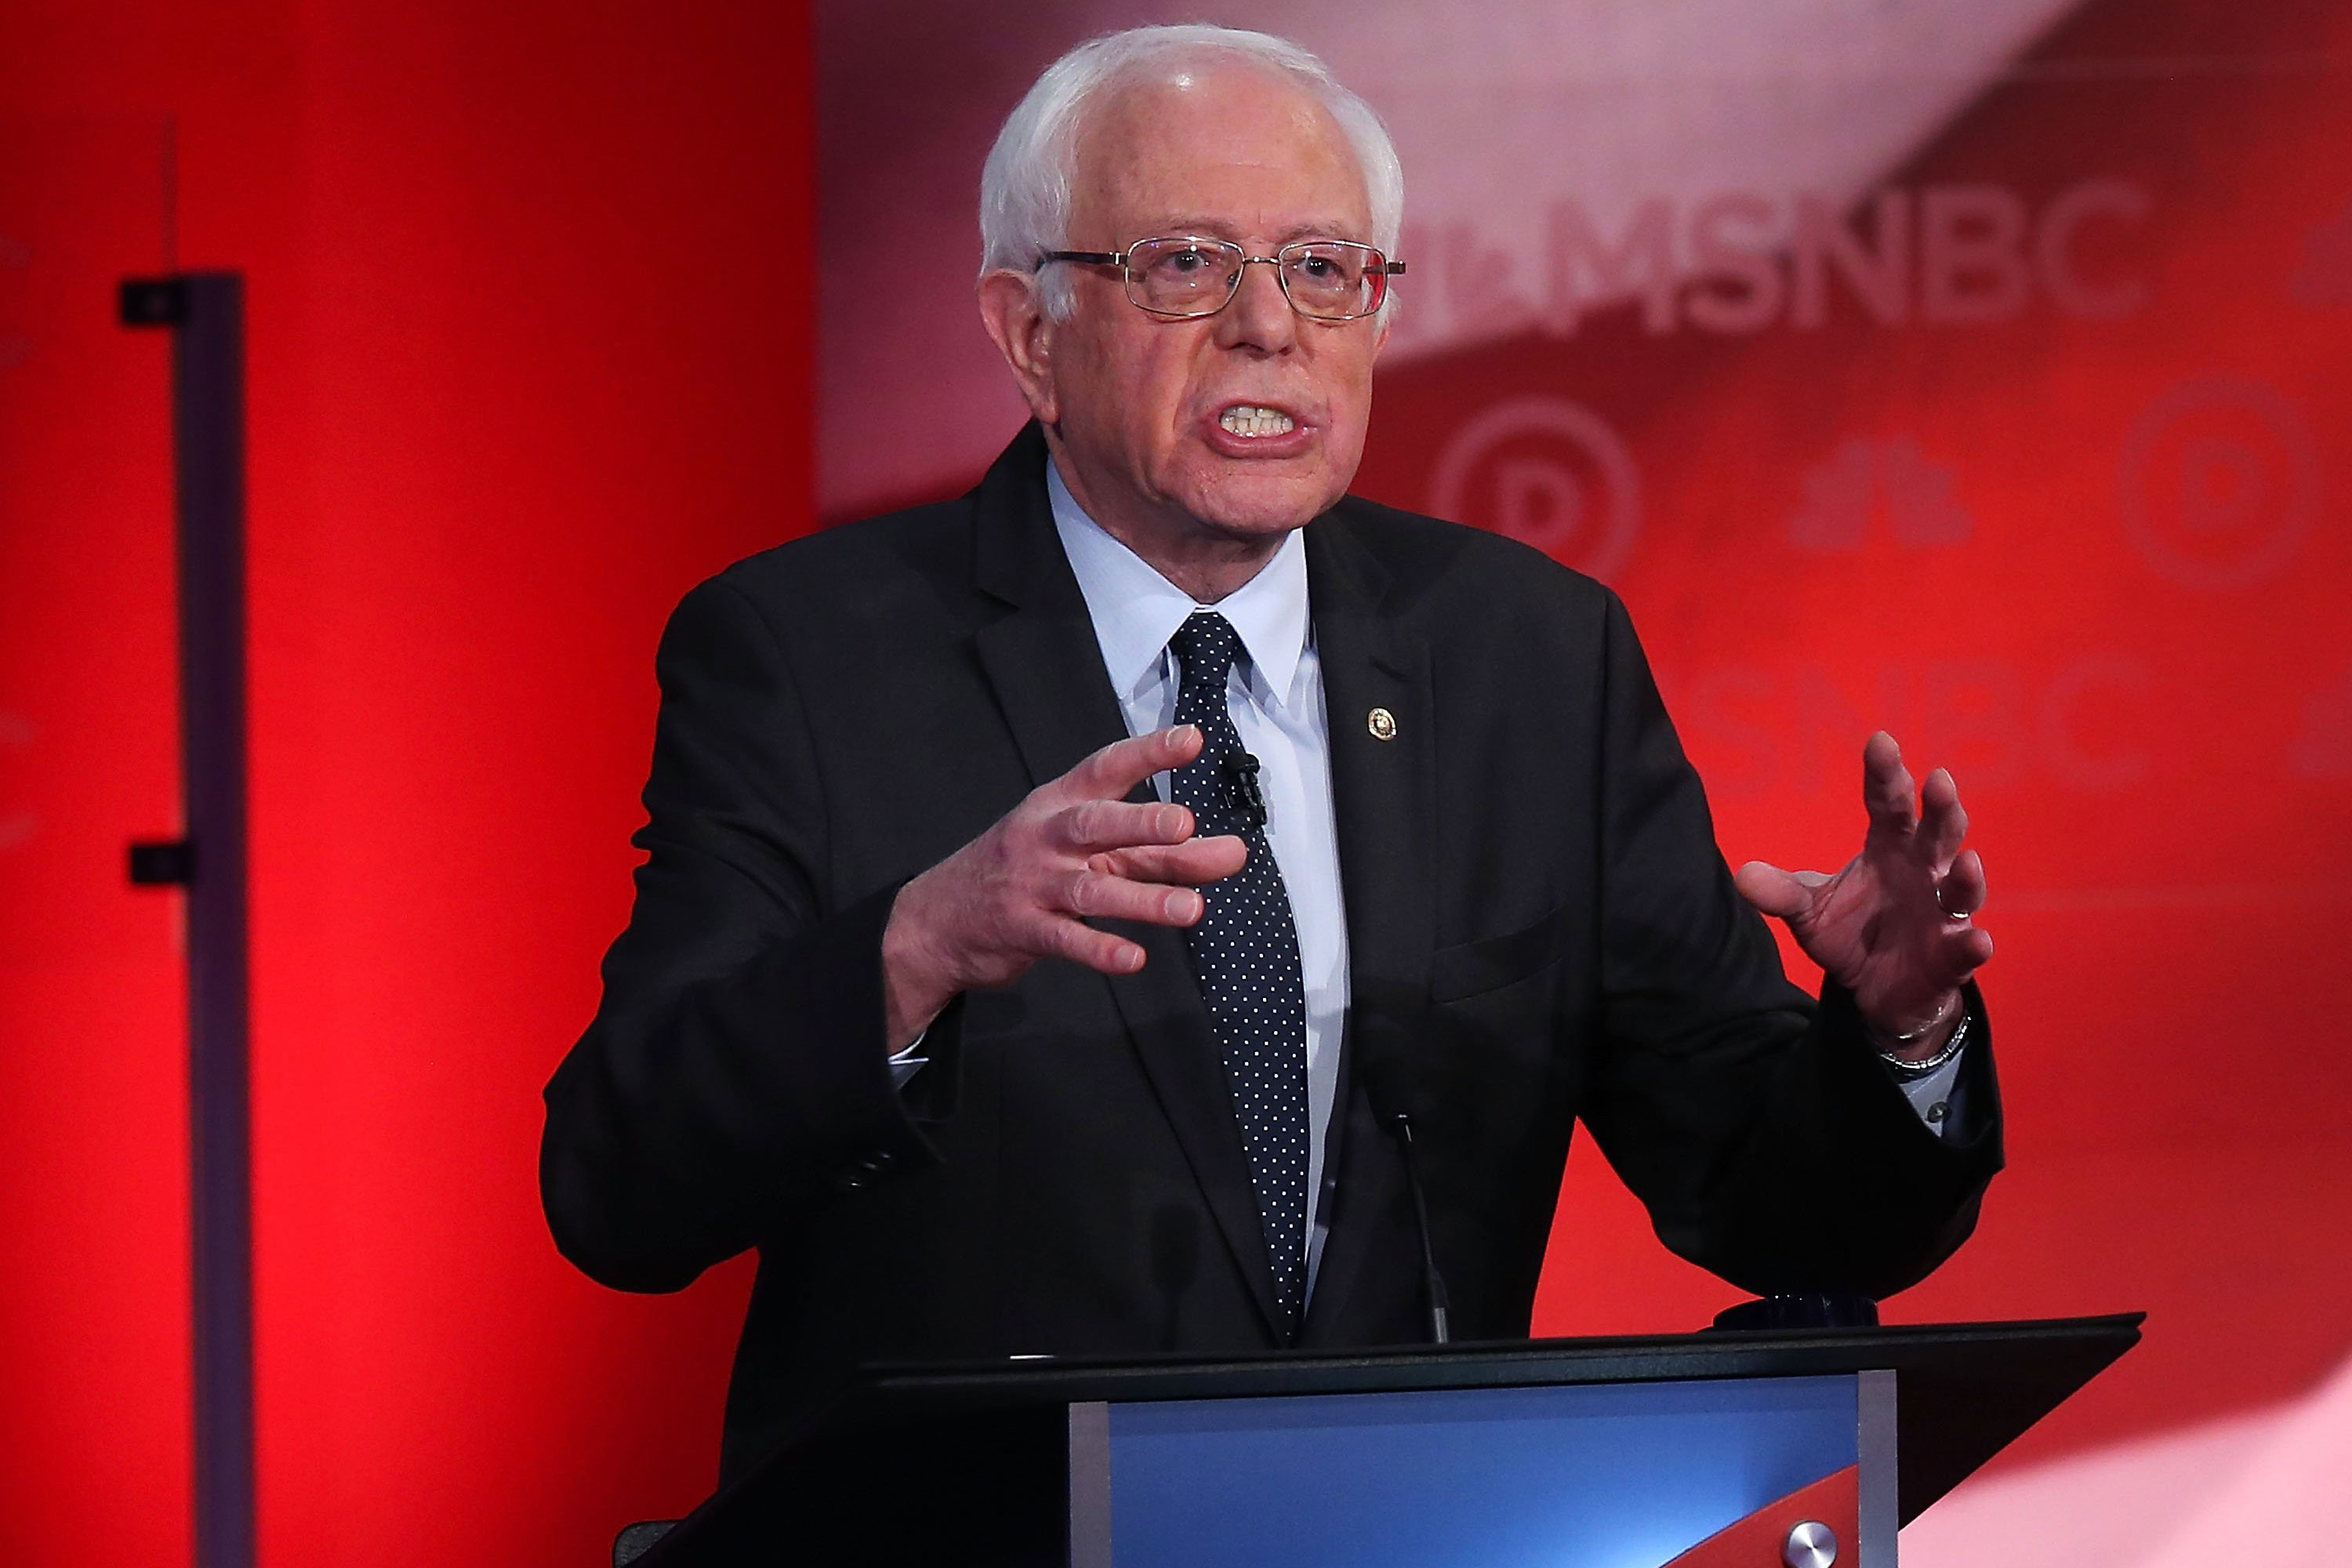 Democratic presidential candidate U.S. Sen. Bernie Sanders (I-VT) speaks during  a Democratic debate with former Secretary of State Hillary Clinton at the University of New Hampshire on Feb. 4, 2016 in Durham, N.H. (Justin Sullivan—Getty Images)